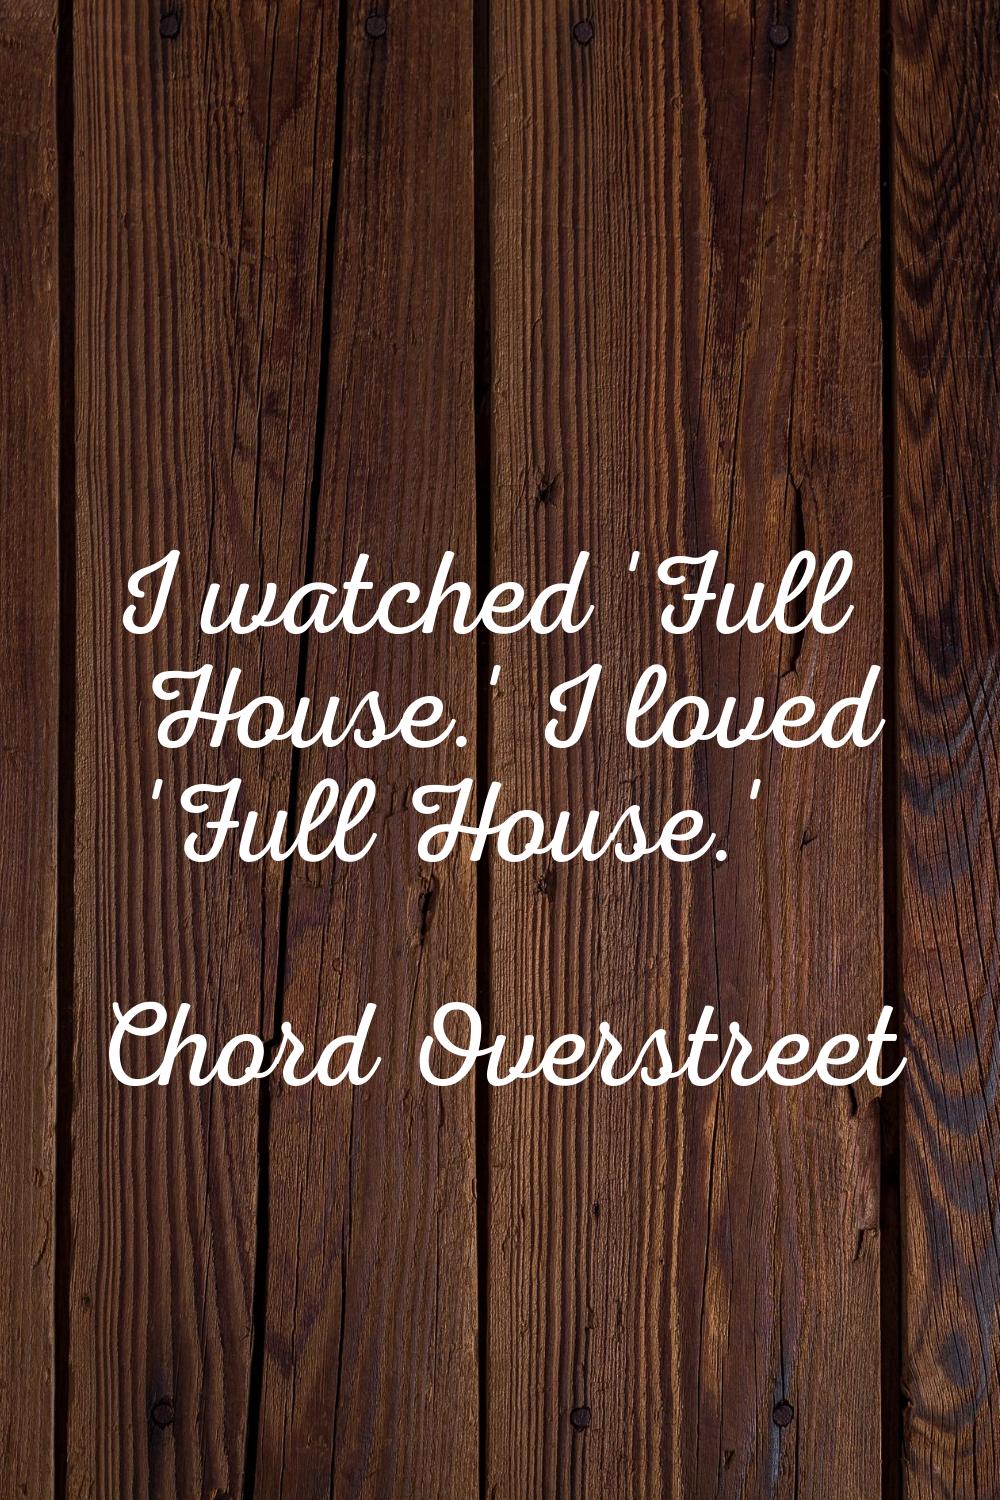 I watched 'Full House.' I loved 'Full House.'